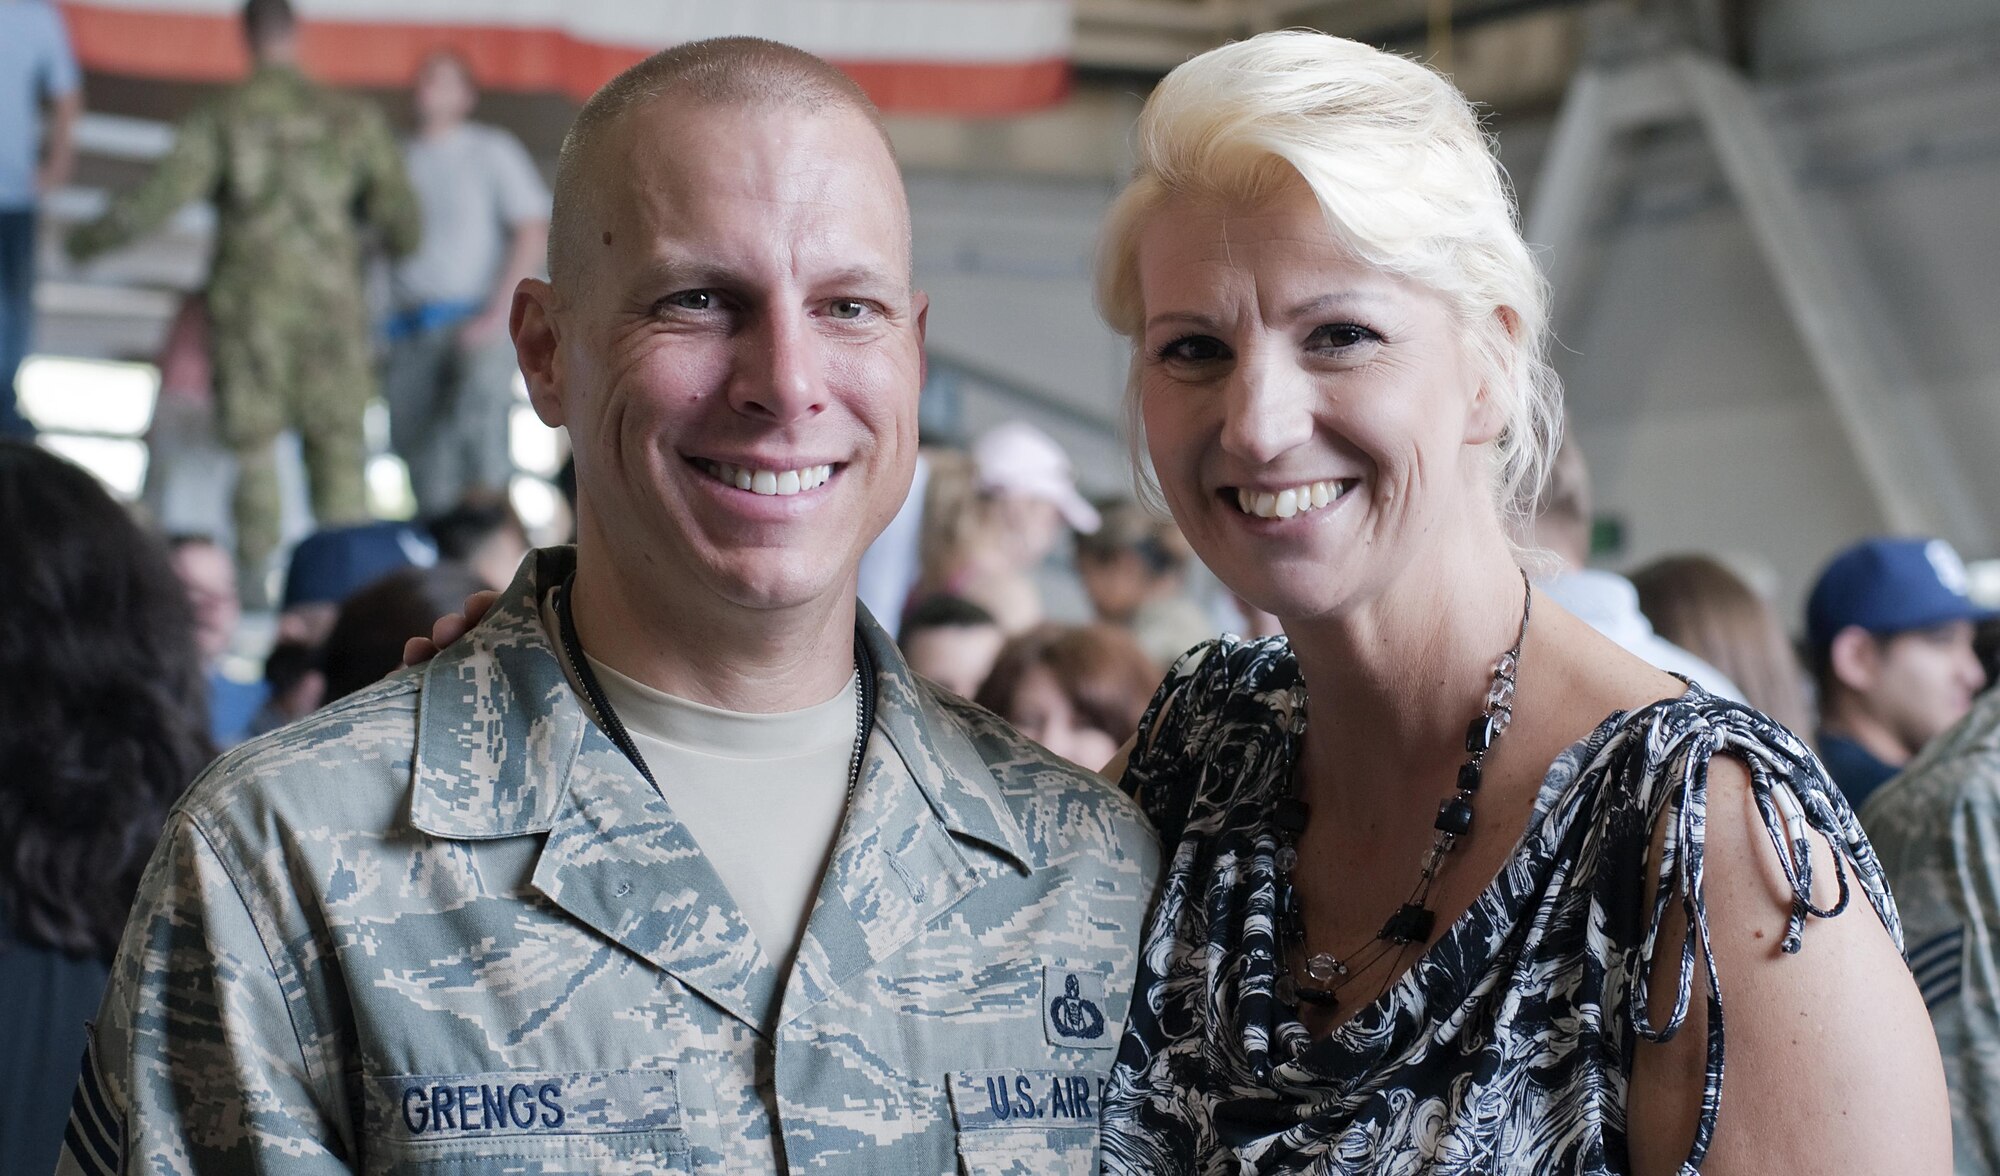 Chief Master Sgt. Matthew Grengs, 52nd Fighter Wing command chief is welcomed home from his deployment in 2012 by his wife, Estelle. Grengs served in the U.S. Air Force for 23 years and has received continued support throughout the years. (Courtesy photo/Chief Master Sgt. Matthew Grengs)